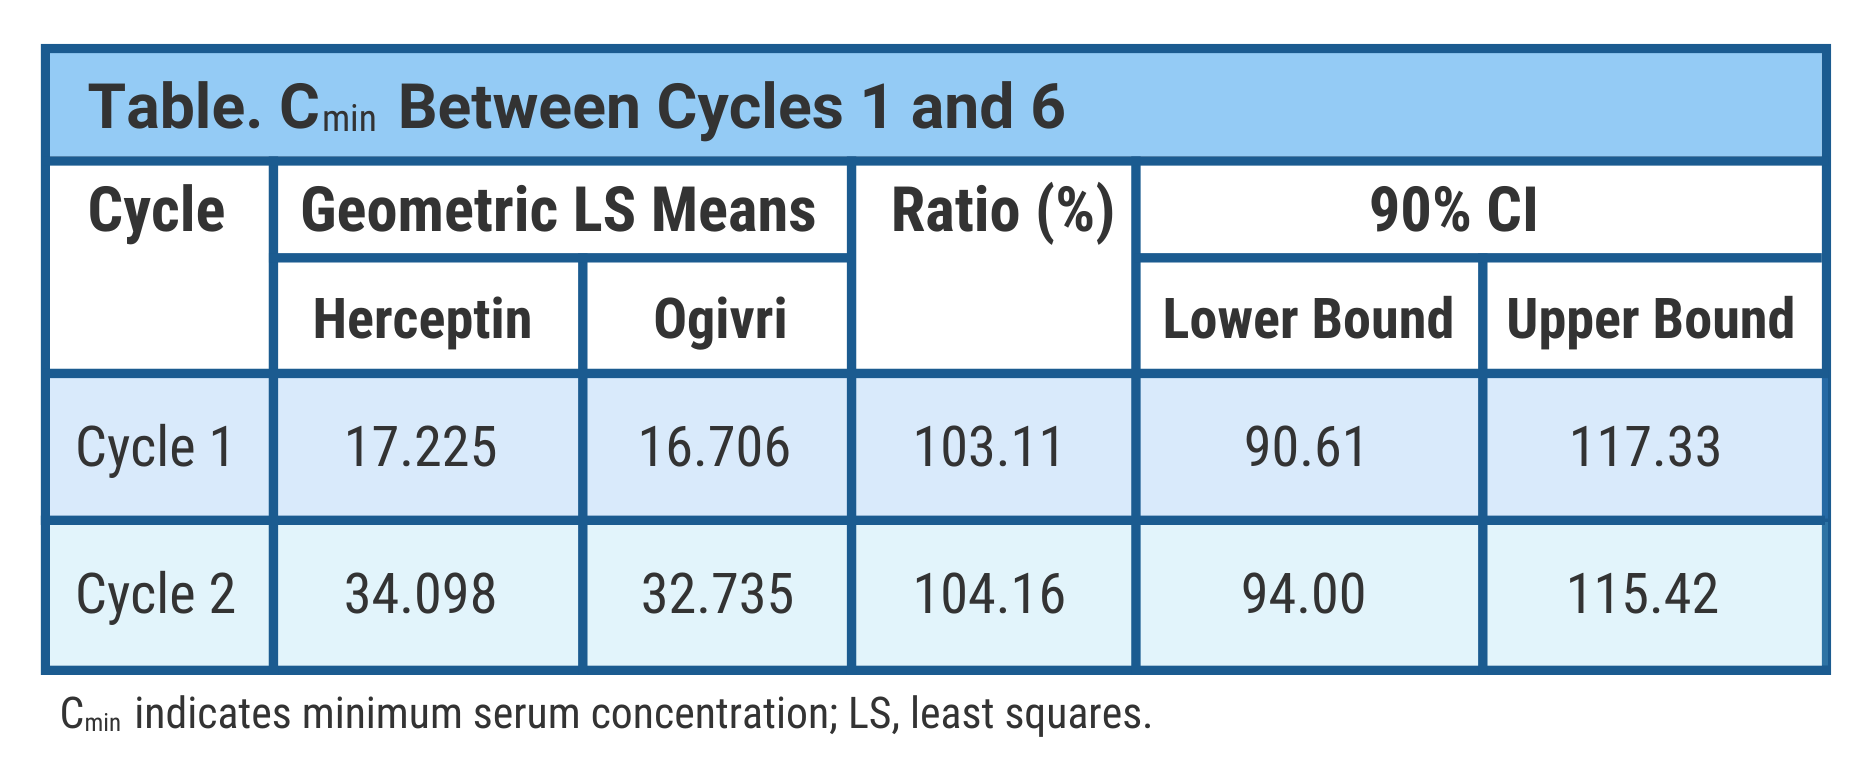 Table. Cmin Between Cycles 1 and 6